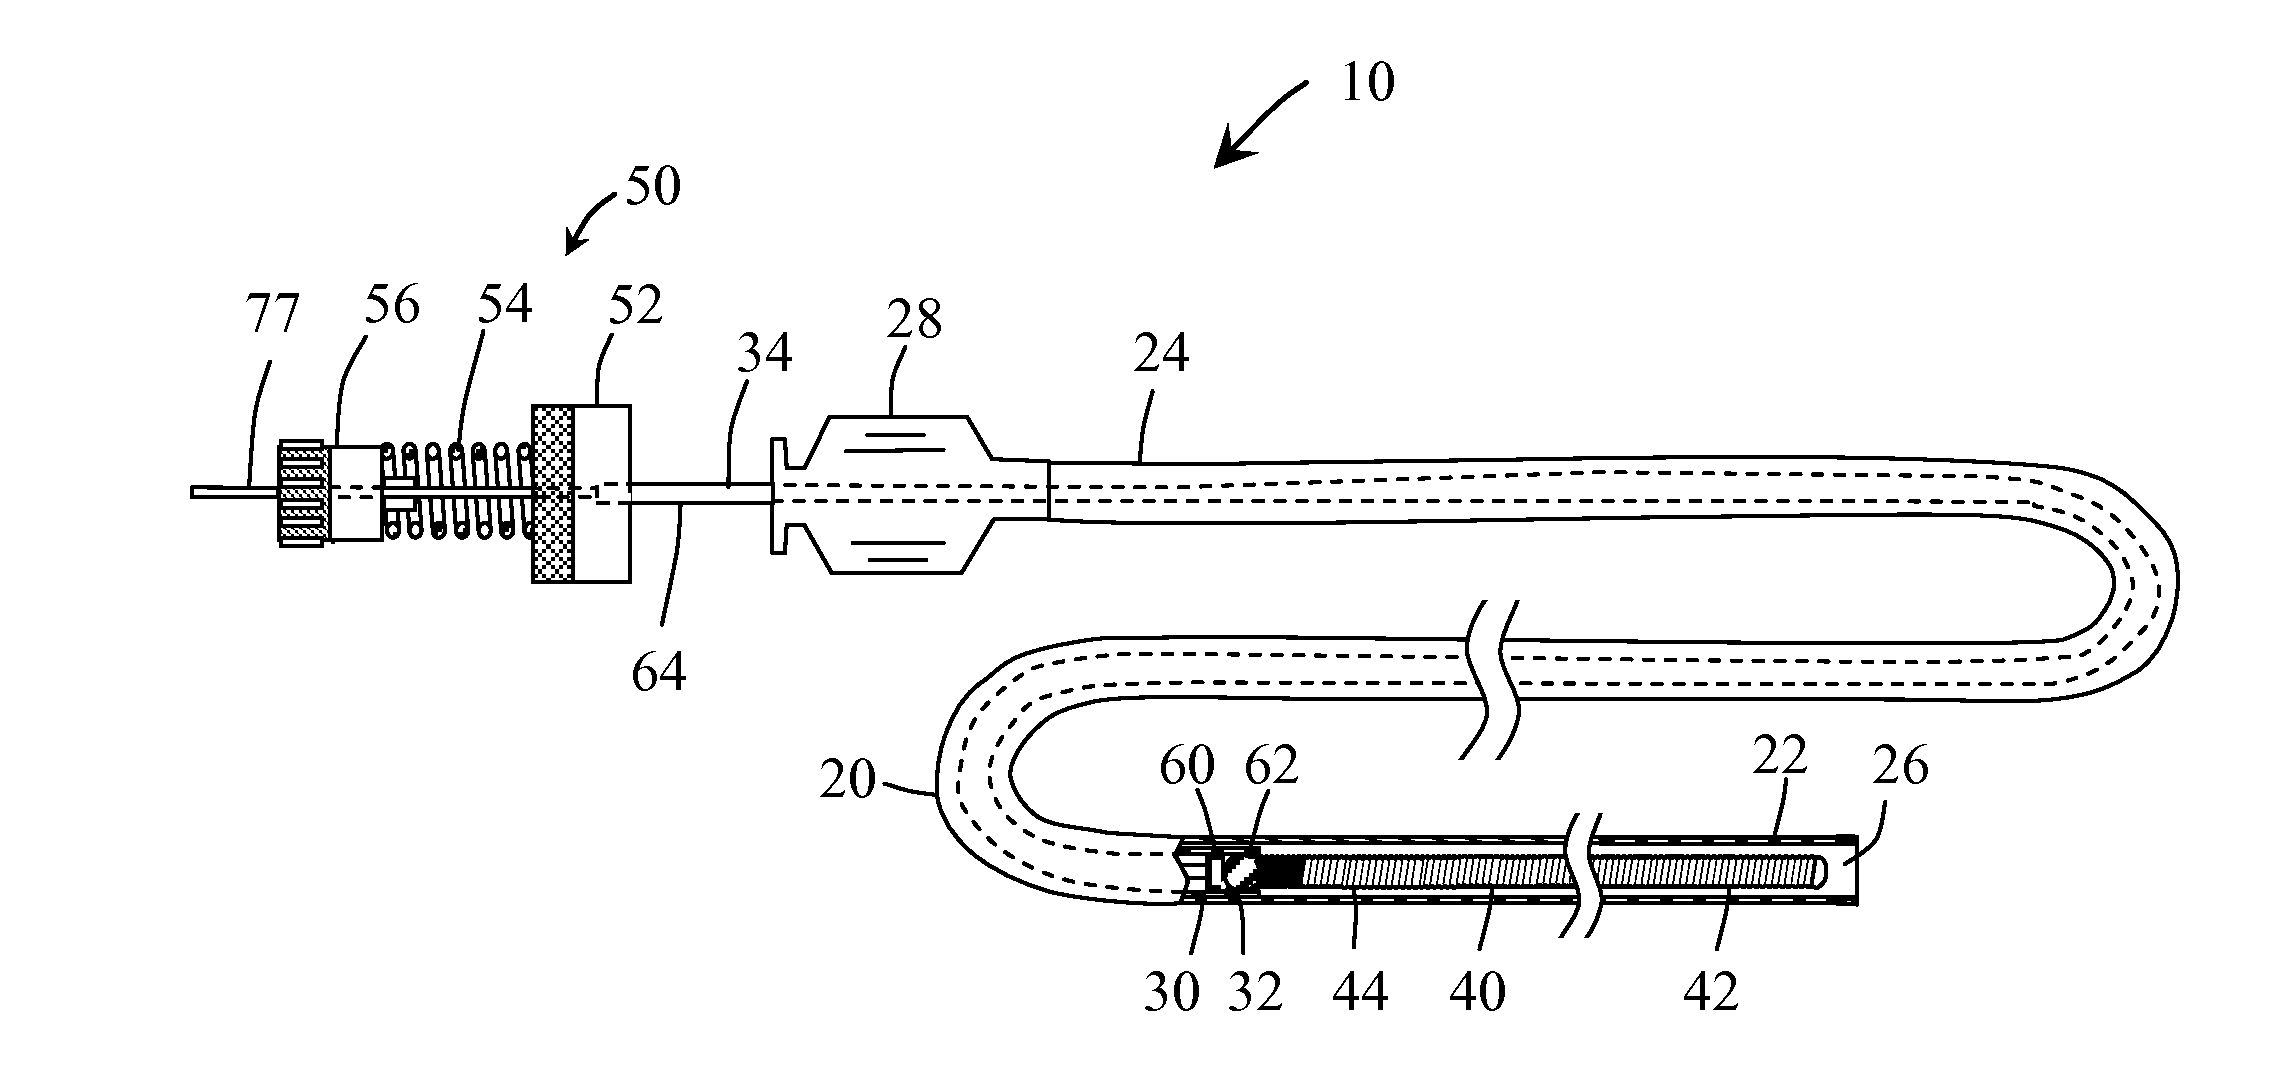 Implant delivery and release system